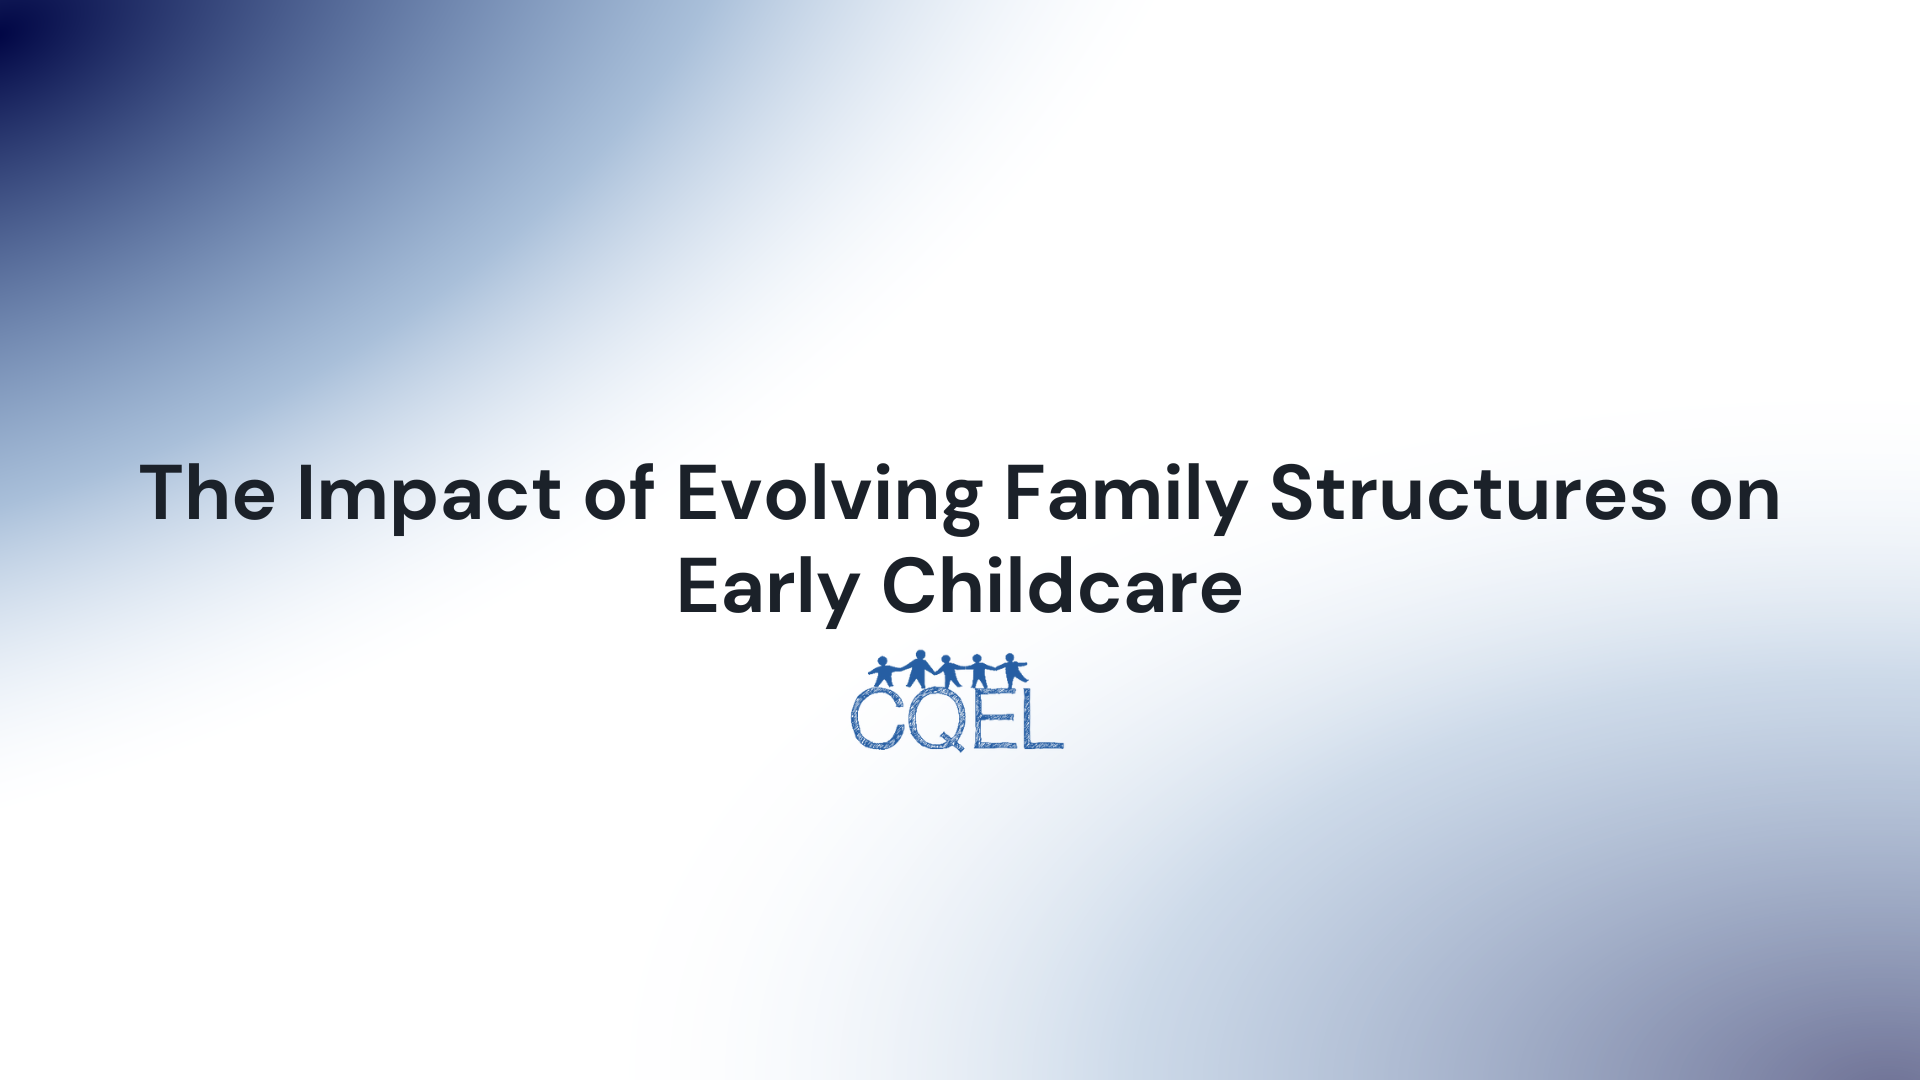 The Impact of Evolving Family Structures on Early Childcare